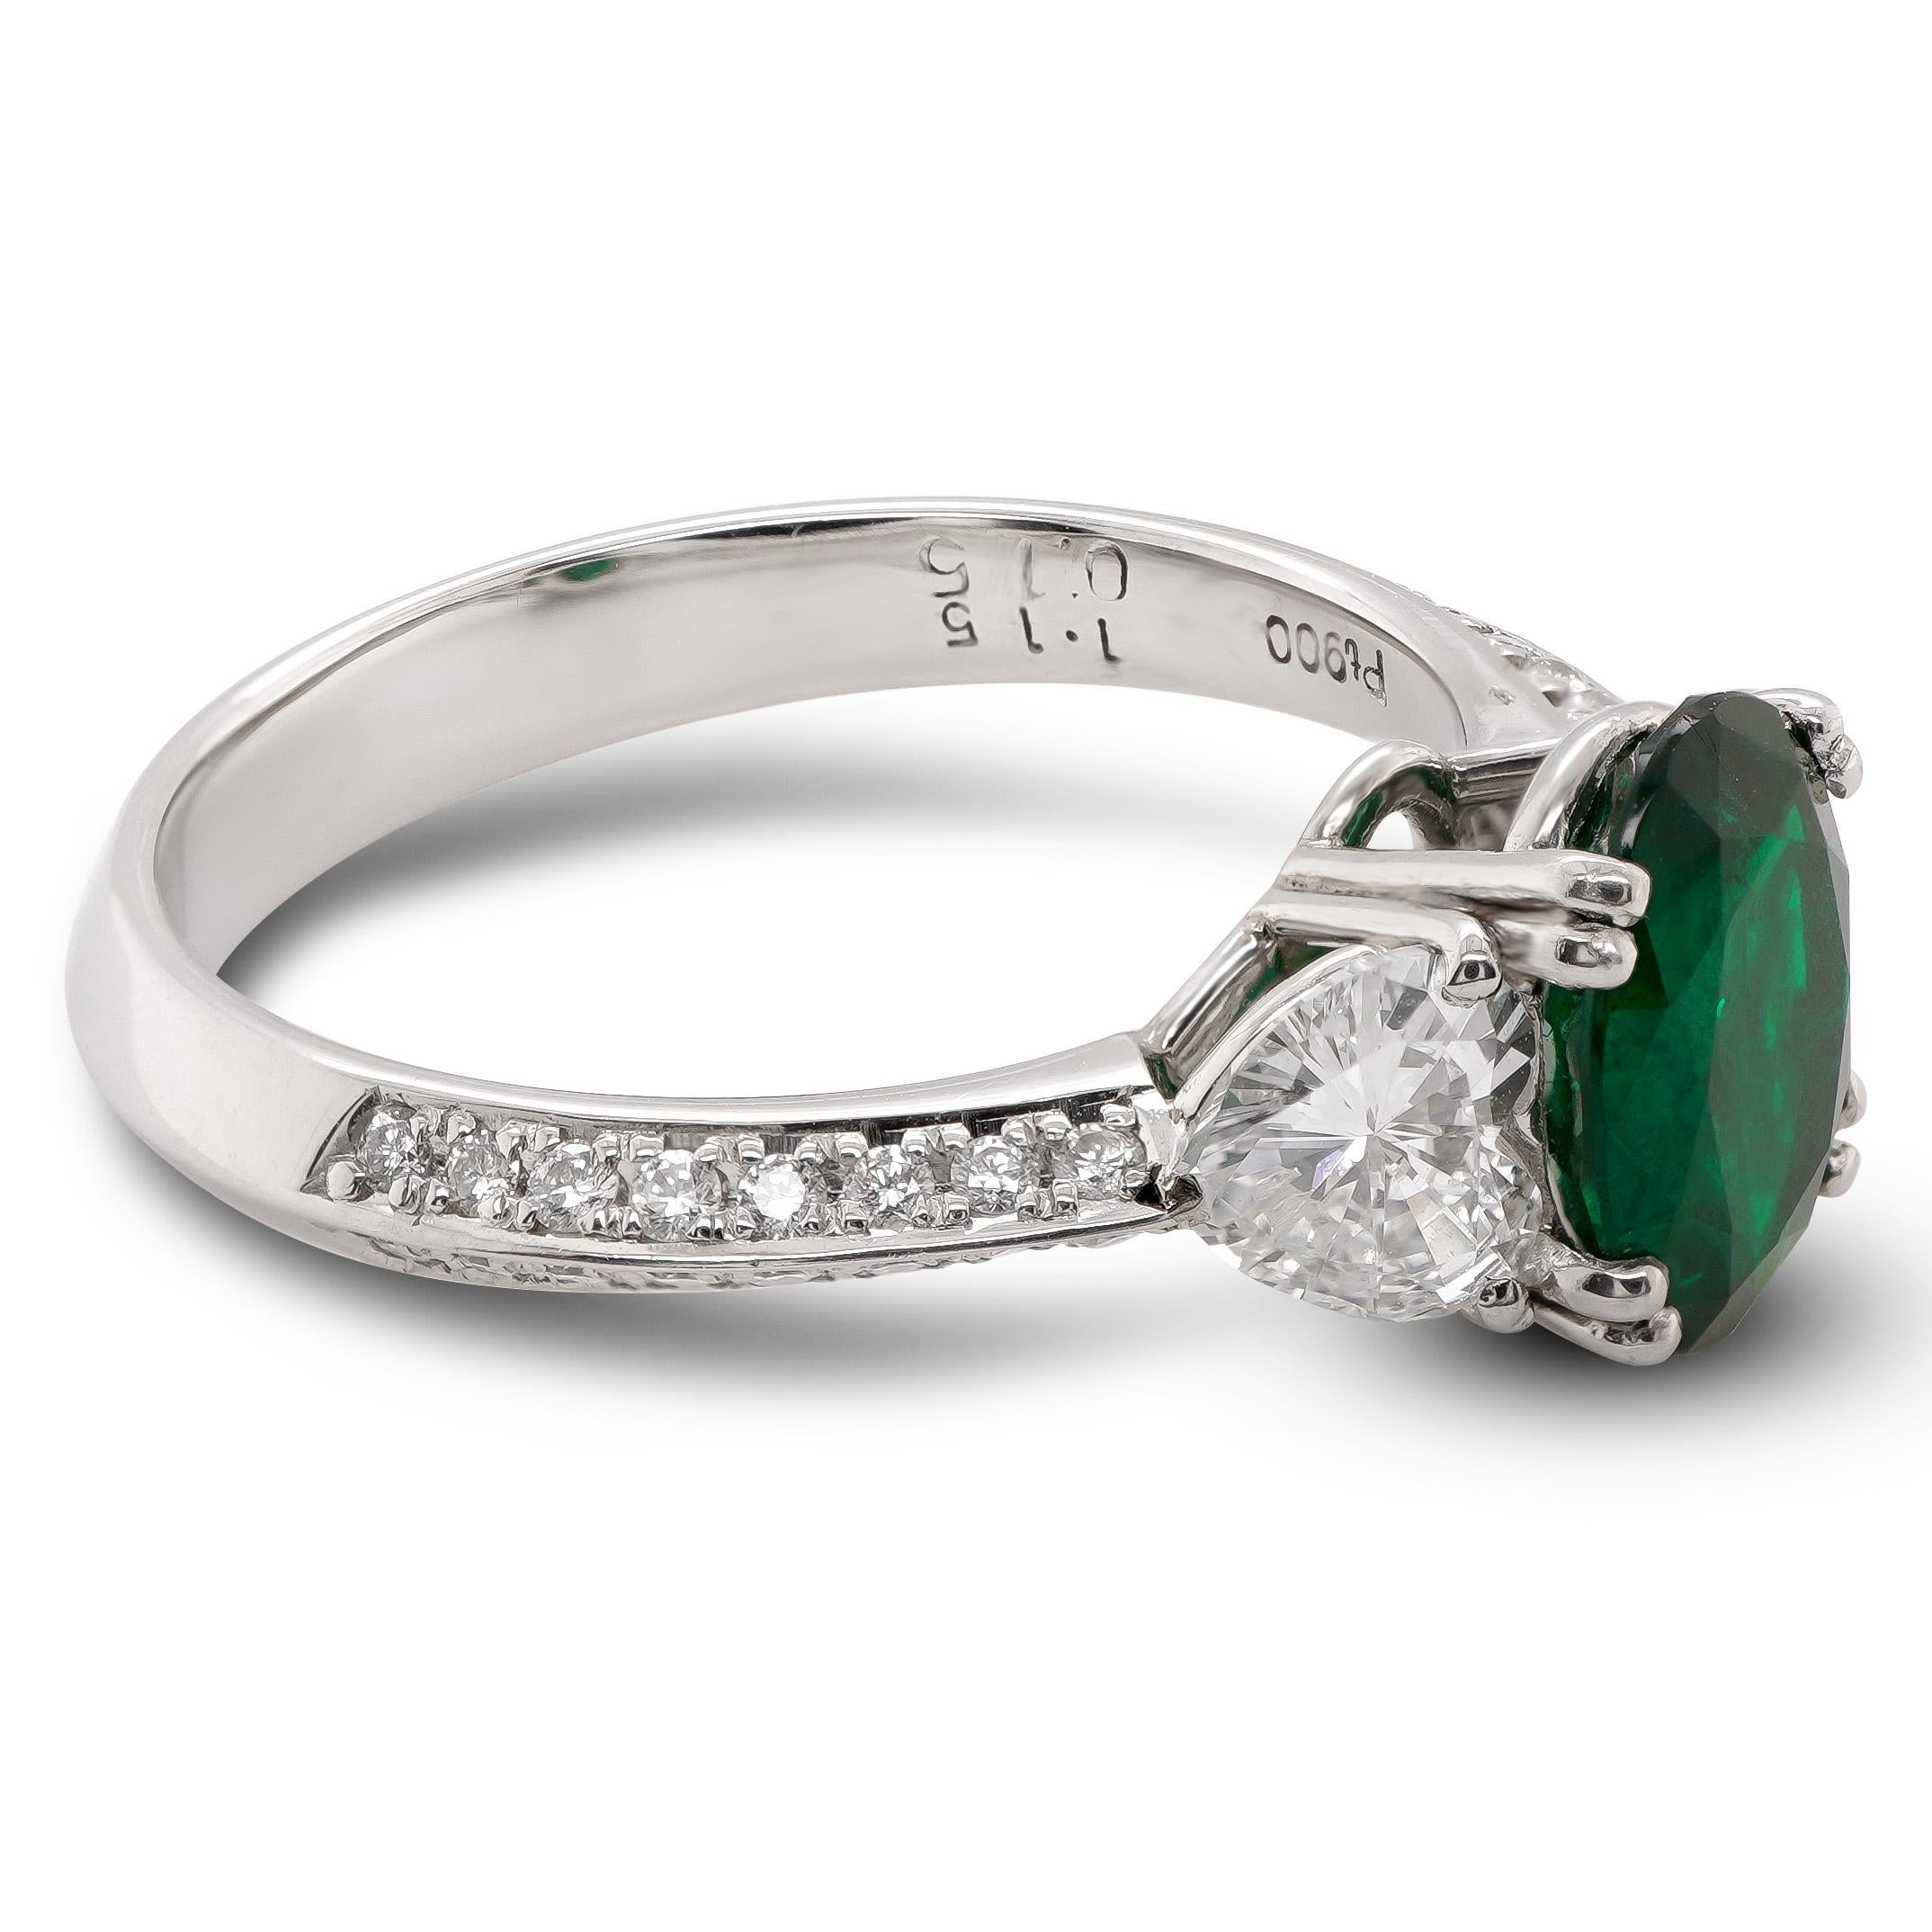 A rare 1.15 IGI Certified Vivid Green Emerald from Tanzania is set along with 0.84 carats of white diamond. The ring is certified by IGI and the emerald has Minor oil.

The details of the diamond are mentioned below:
Color: F
Clarity: Vs
